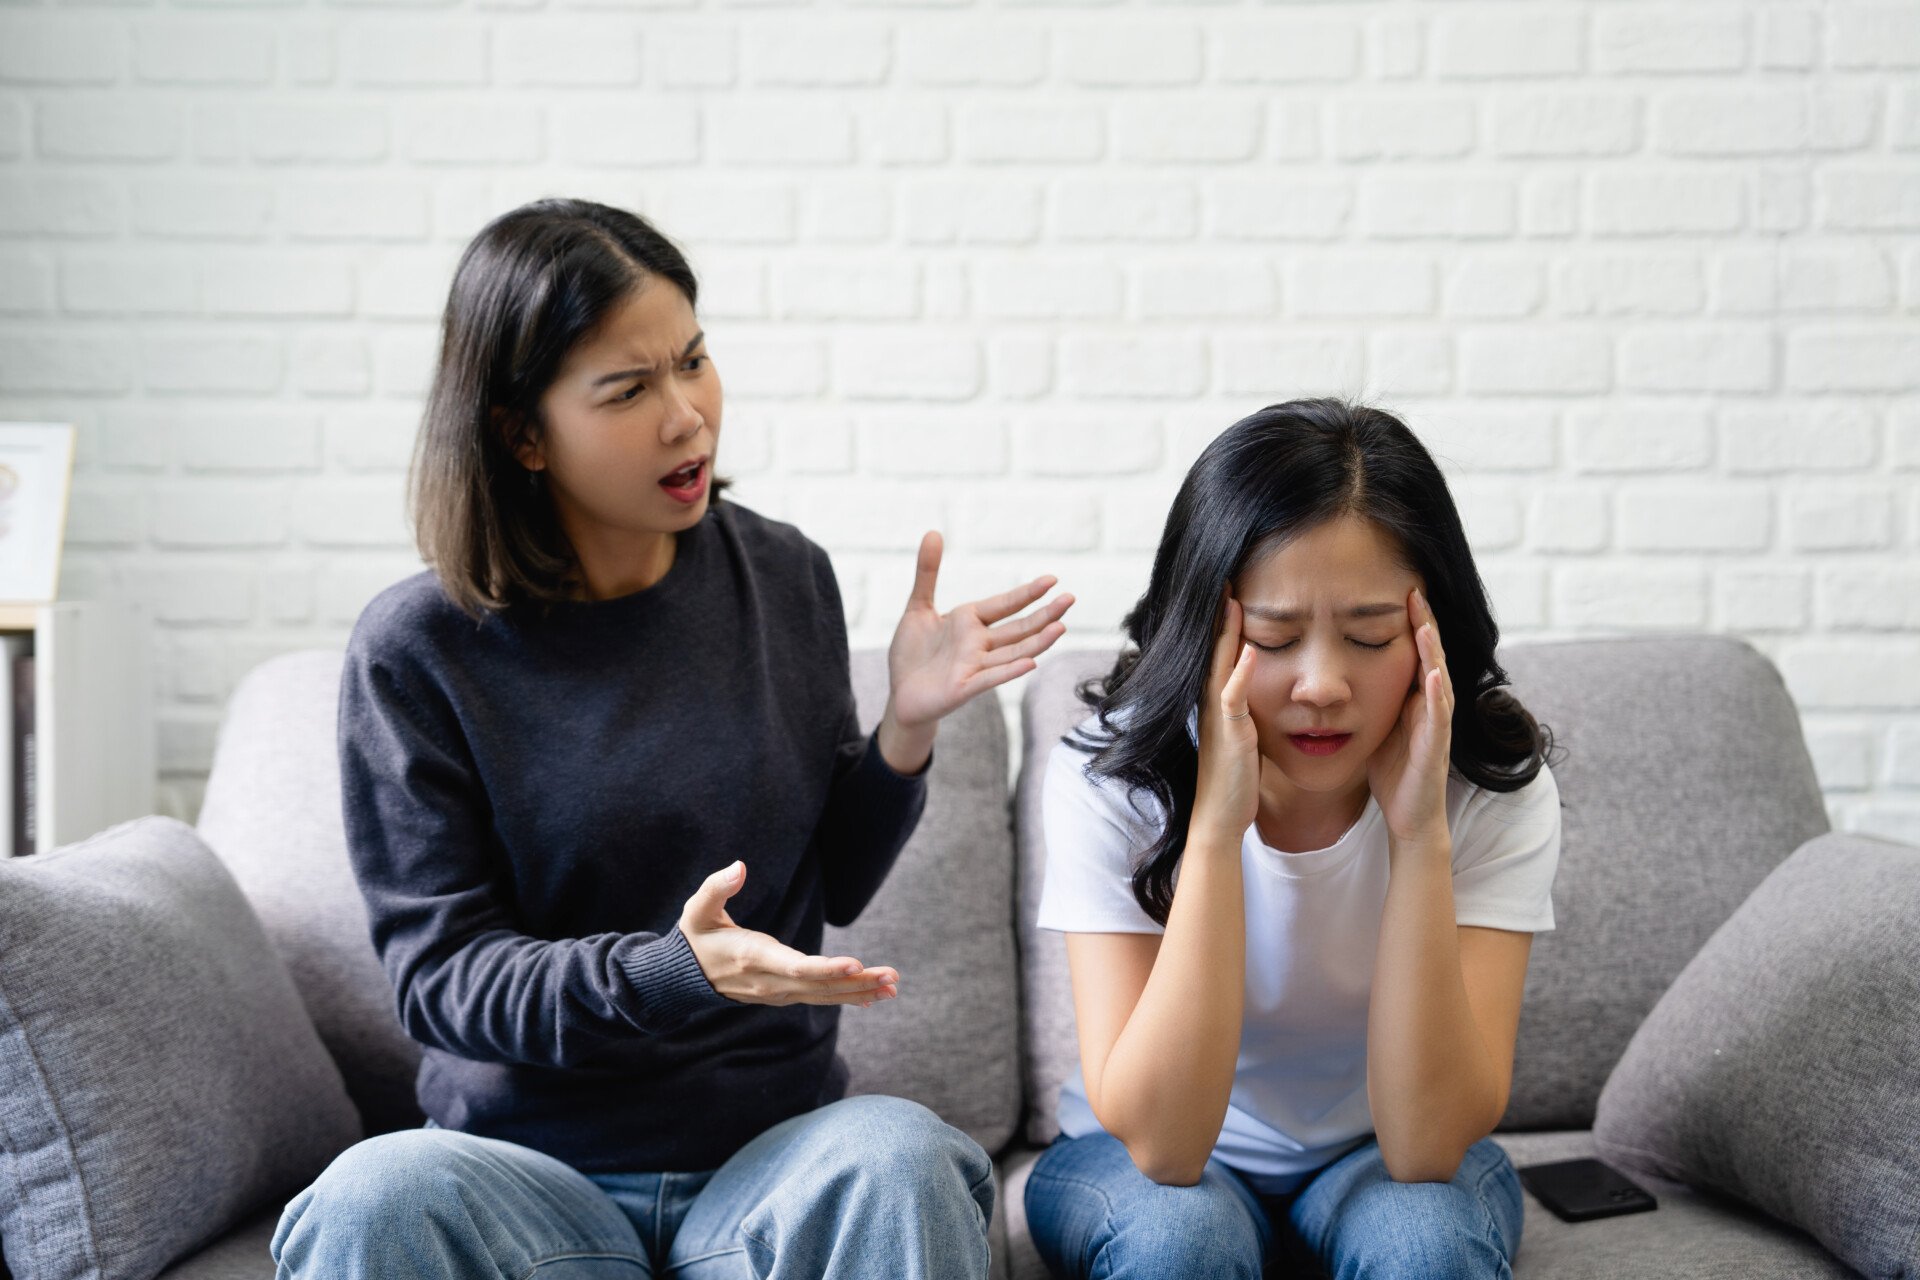 two women arguing on a sofa, one is shouting while the other has head in her hands looking frustrated.